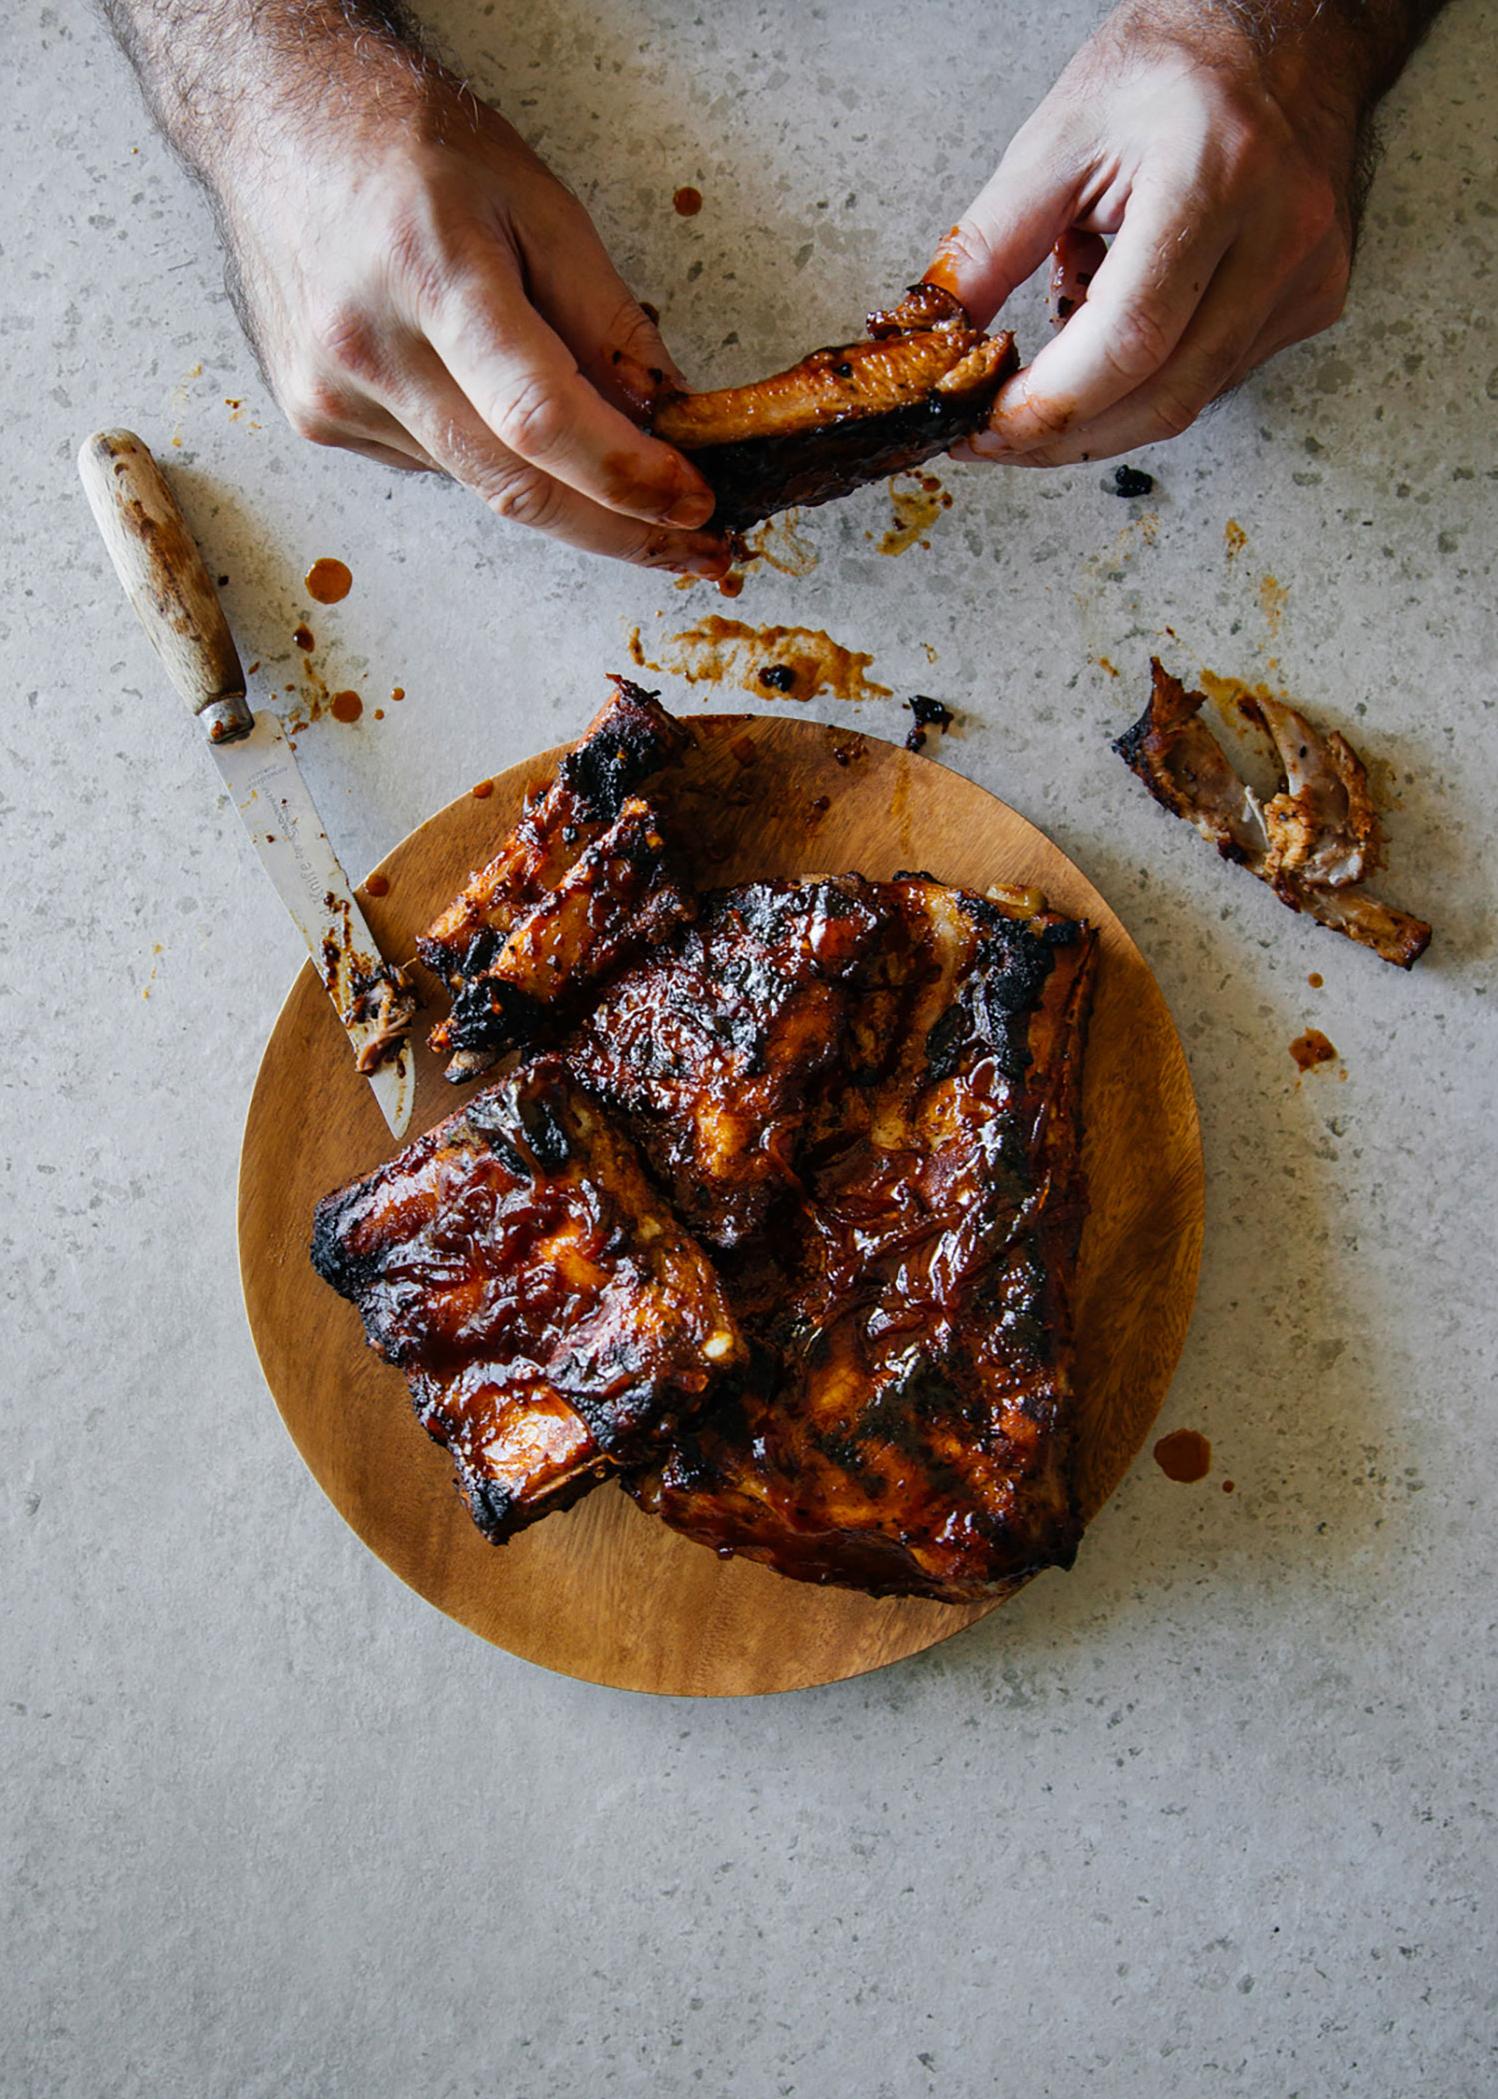  These ribs are infused with a sweet and tangy marinade that will tantalize your taste buds.